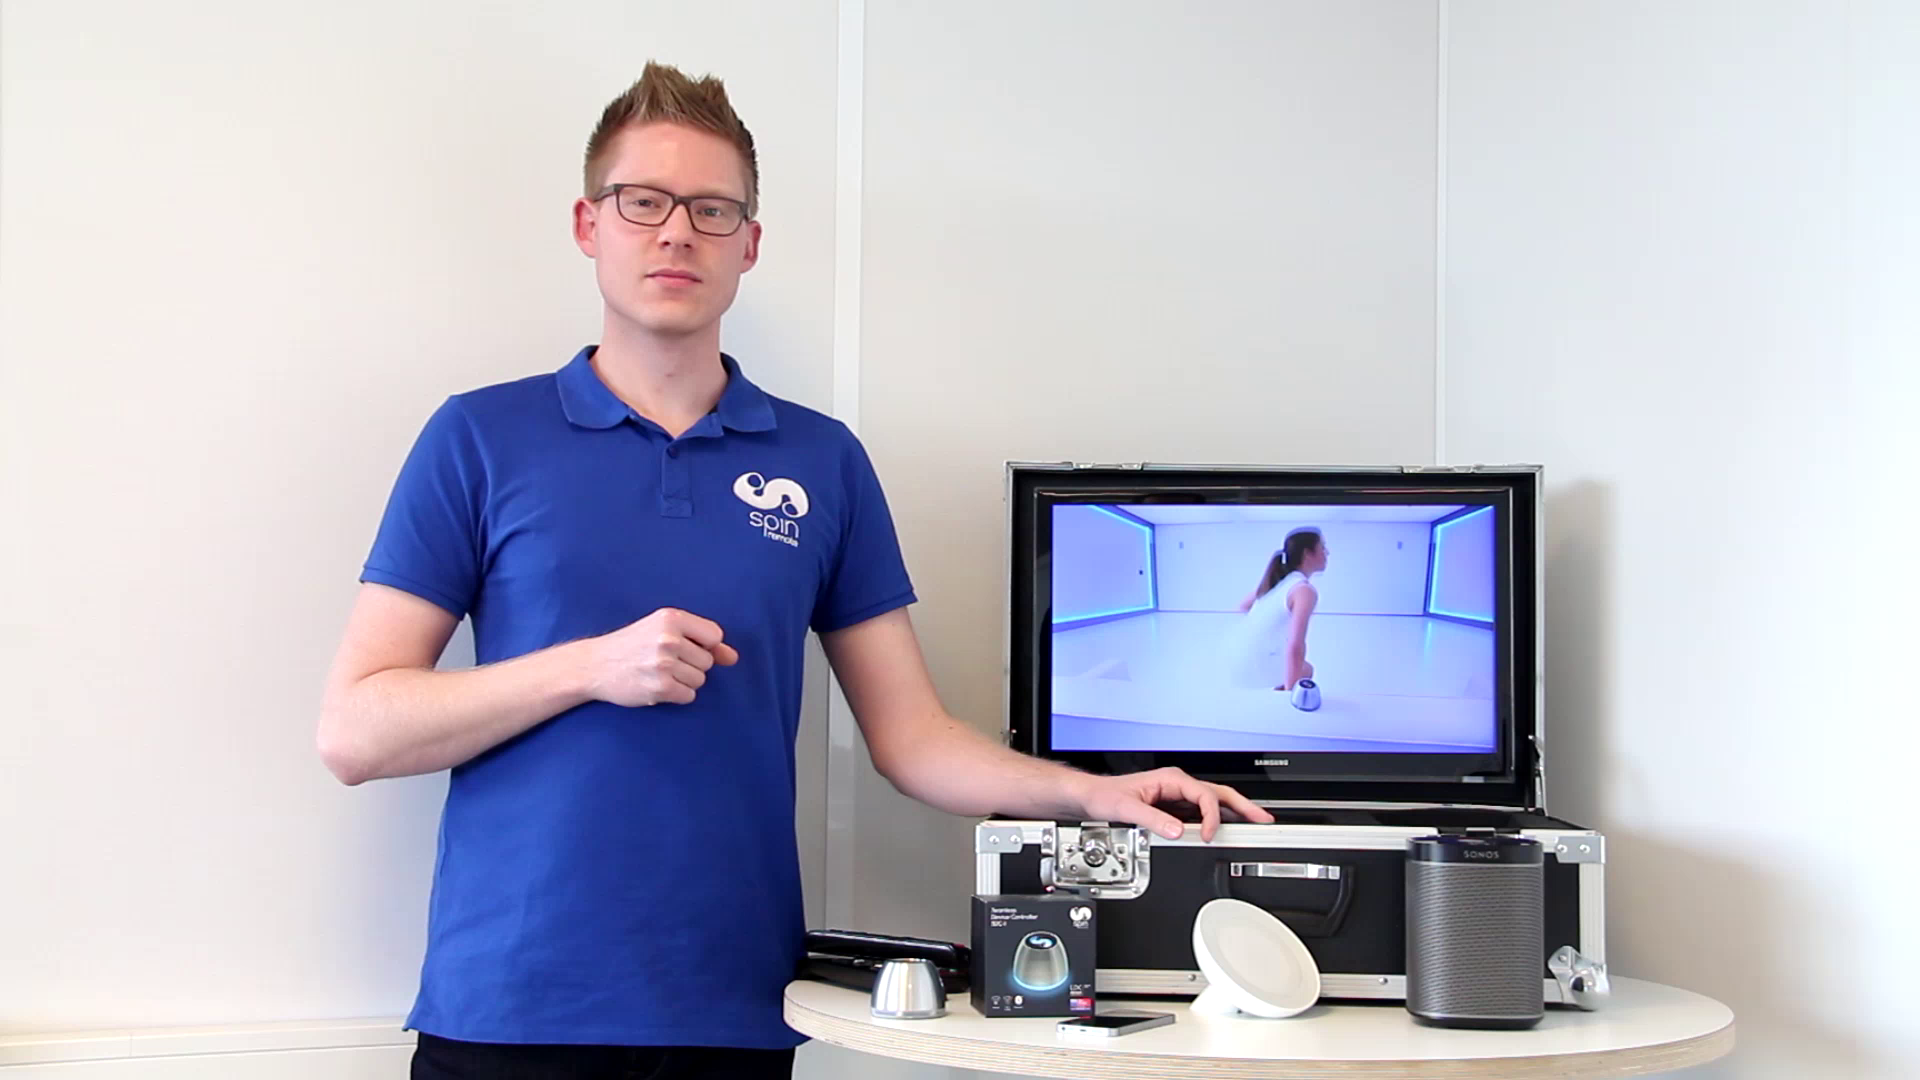 Product Specialist Arjan demonstrates the SPIN remote SDC-1